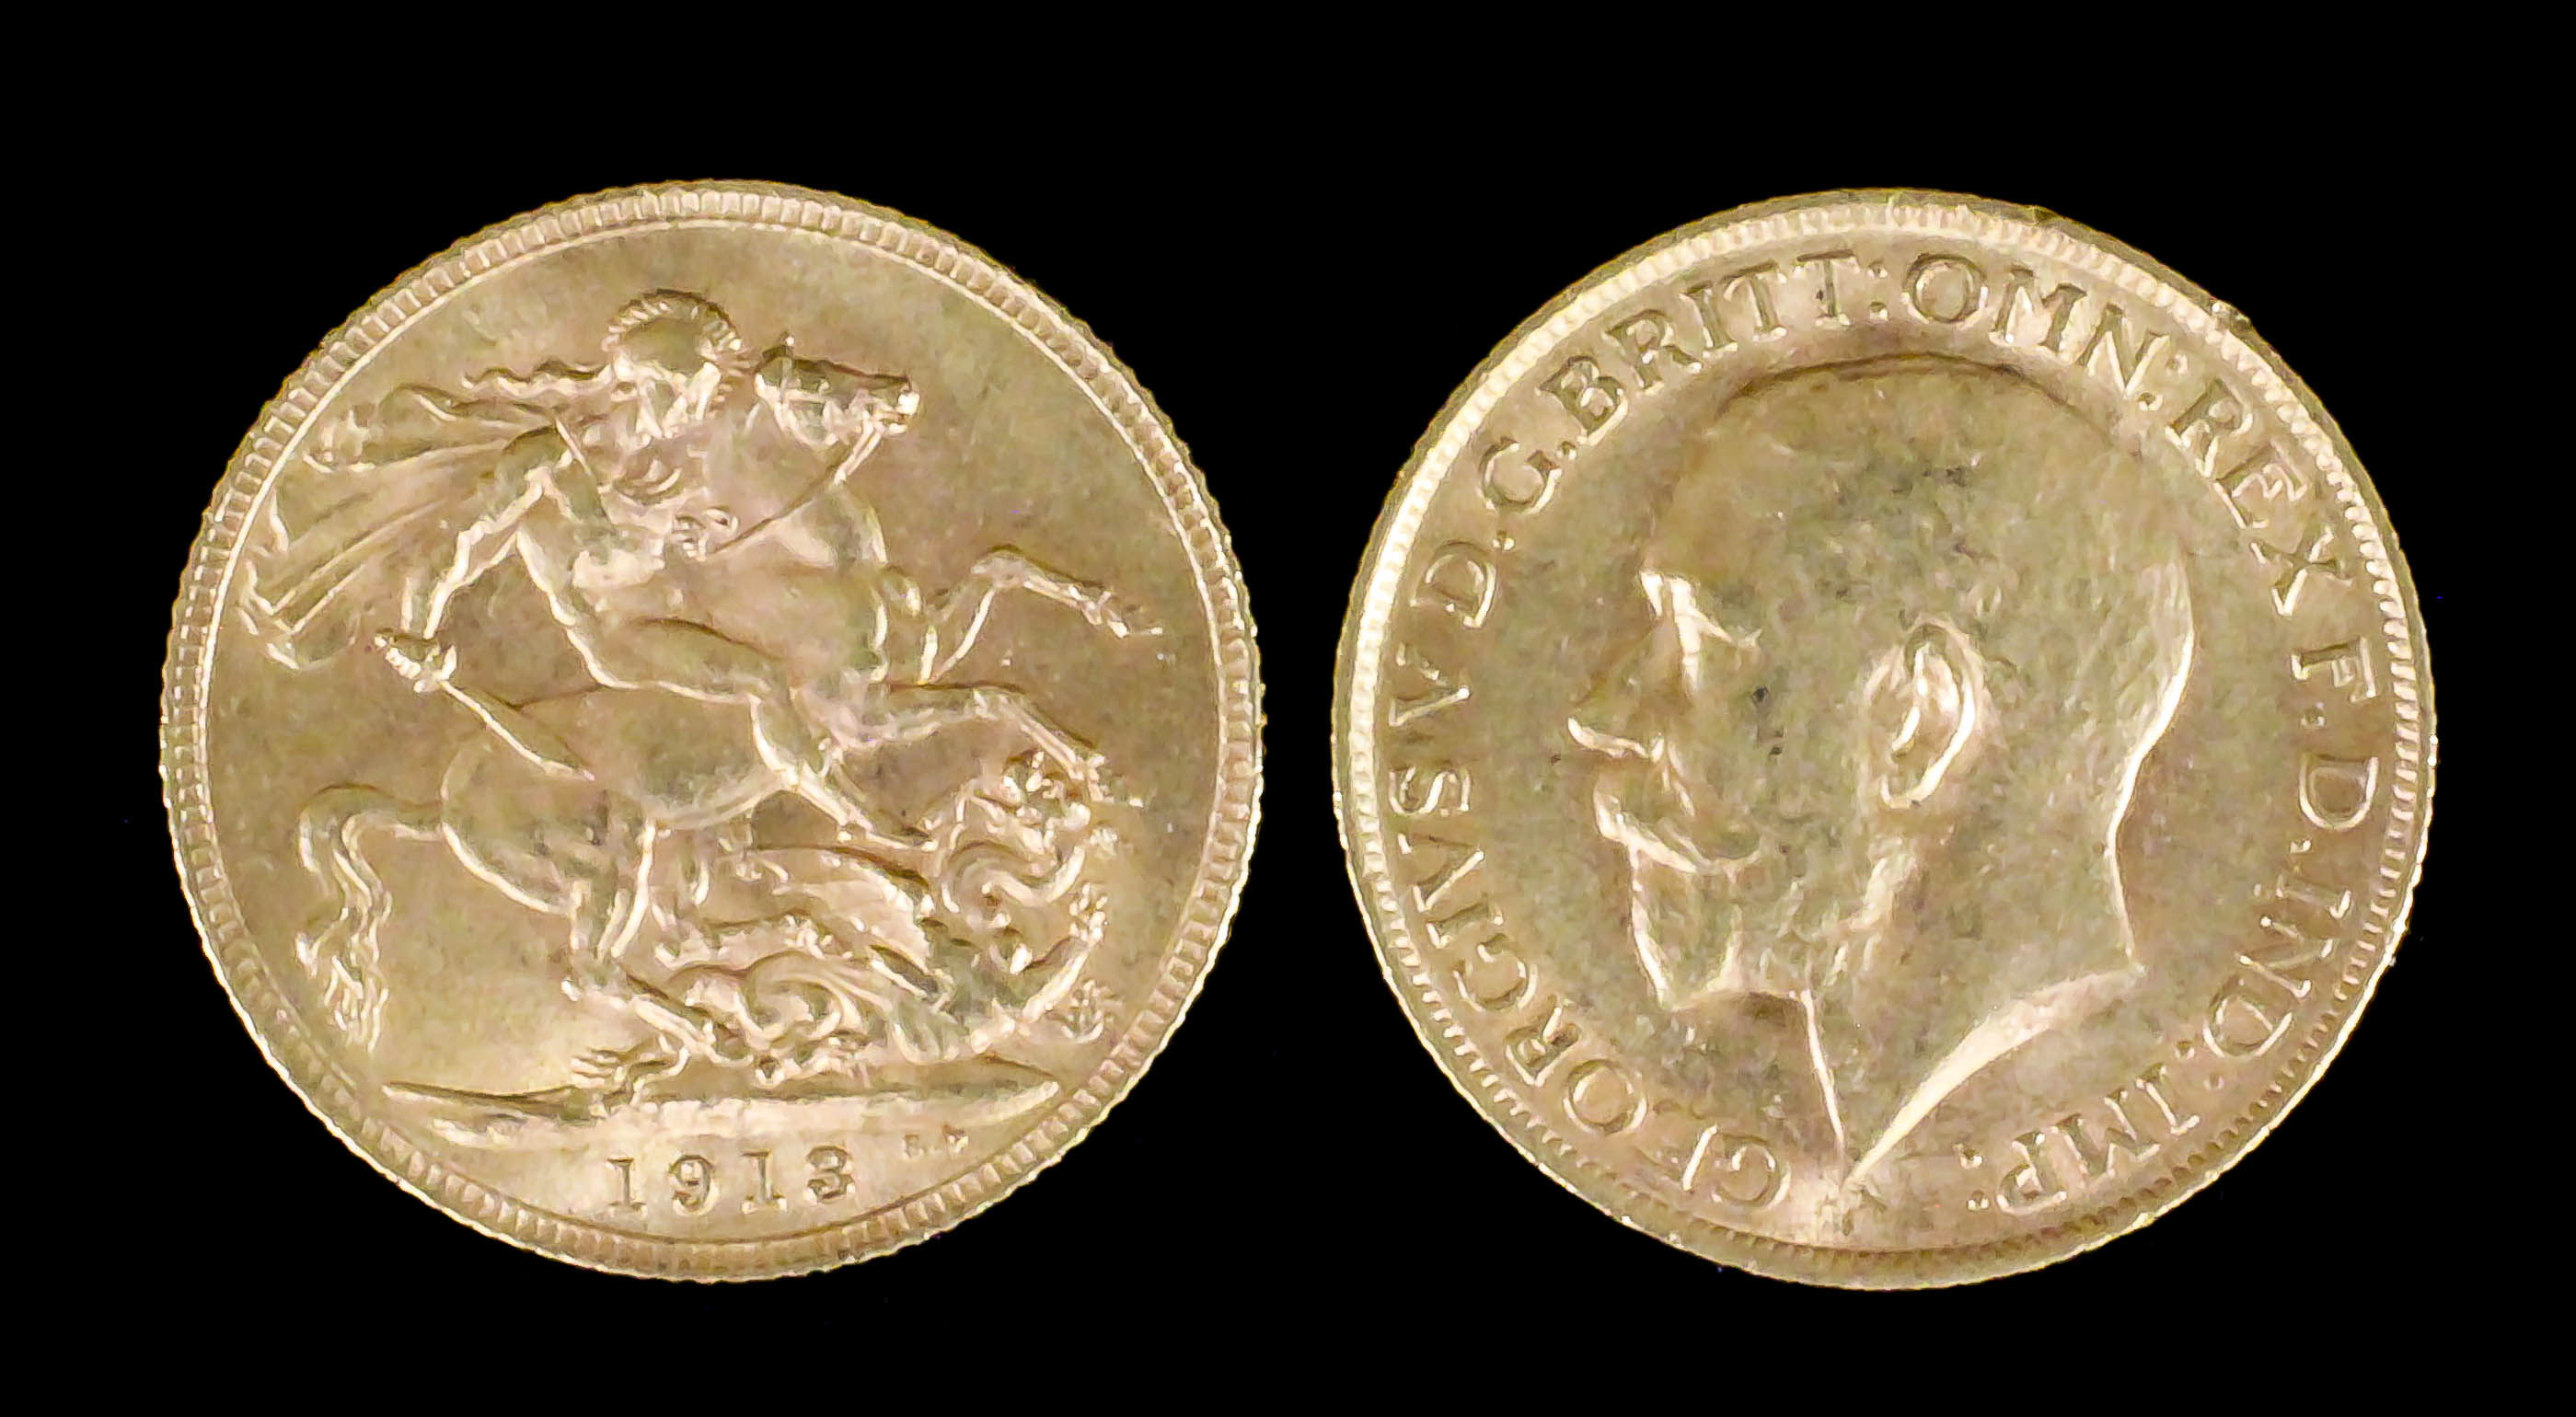 Two George V 1913 Sovereigns (both Fine - with edge knocks)